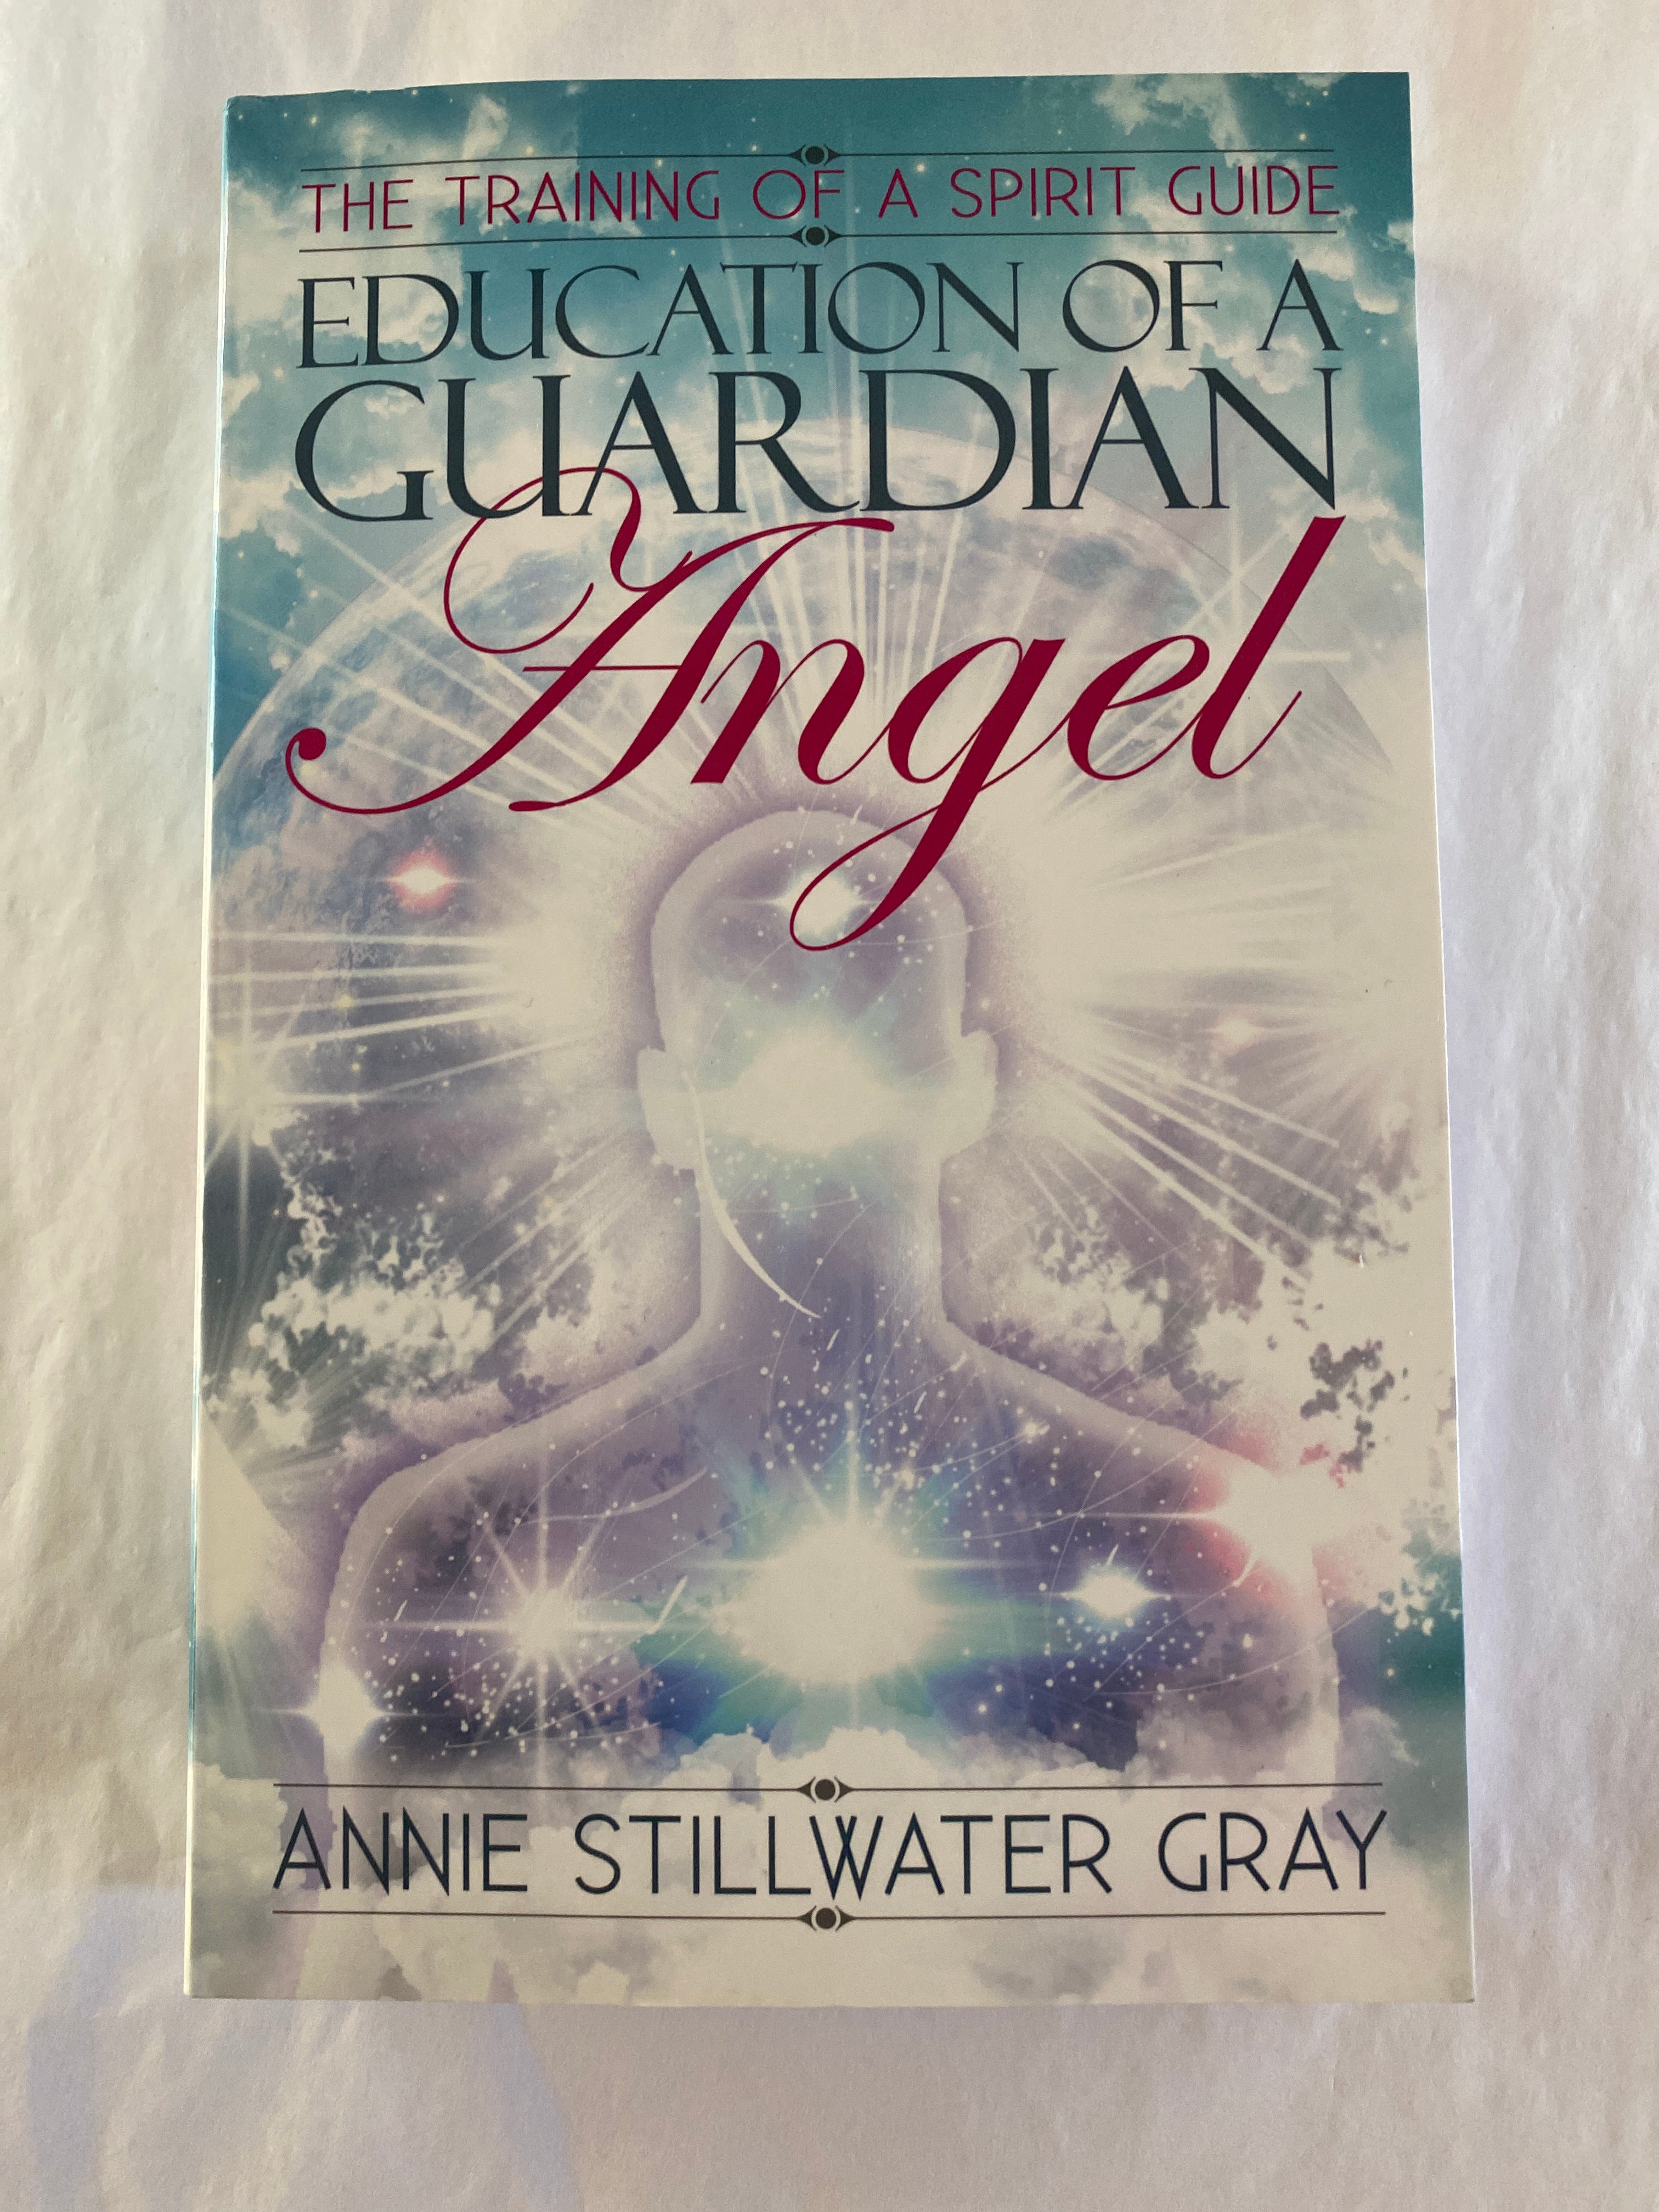 The Training of a Spirit Guide Education of a Guardian Angel